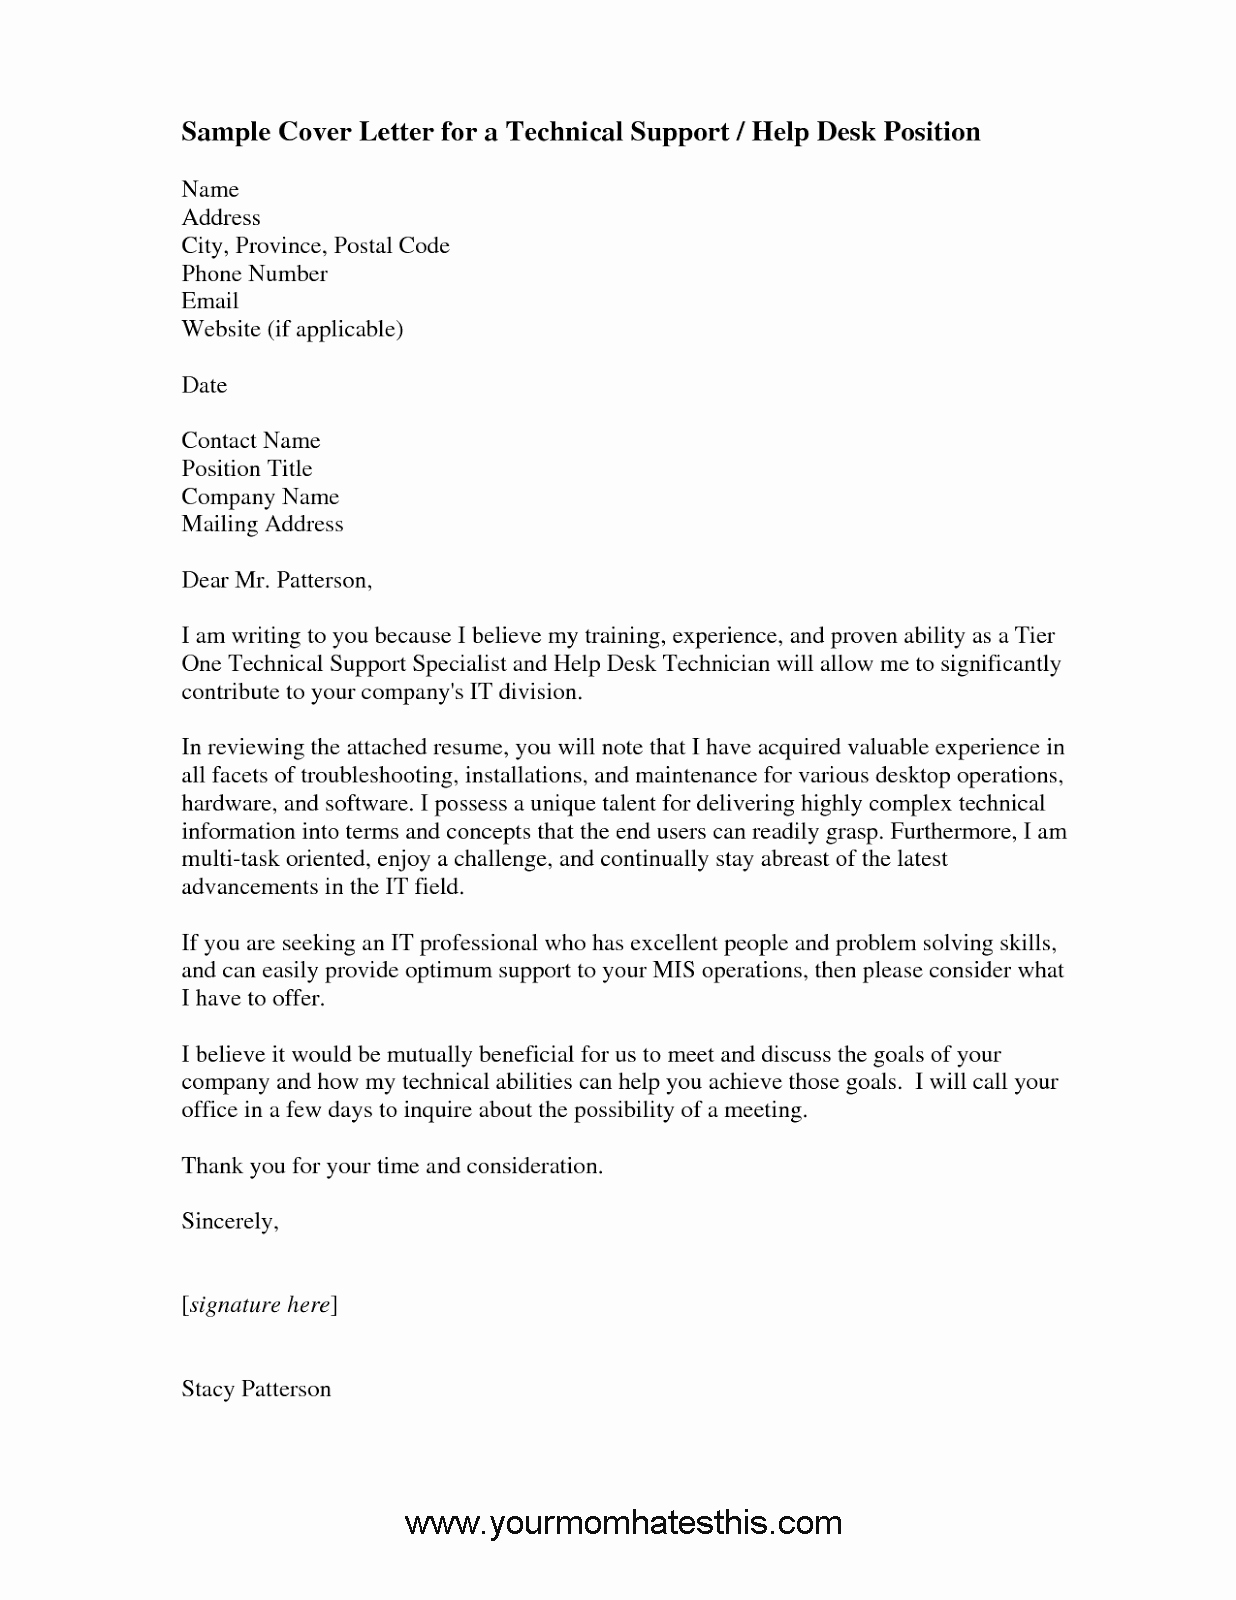 Letter Of Support Templates Fresh Cover Letter Samples Download Free Cover Letter Templates